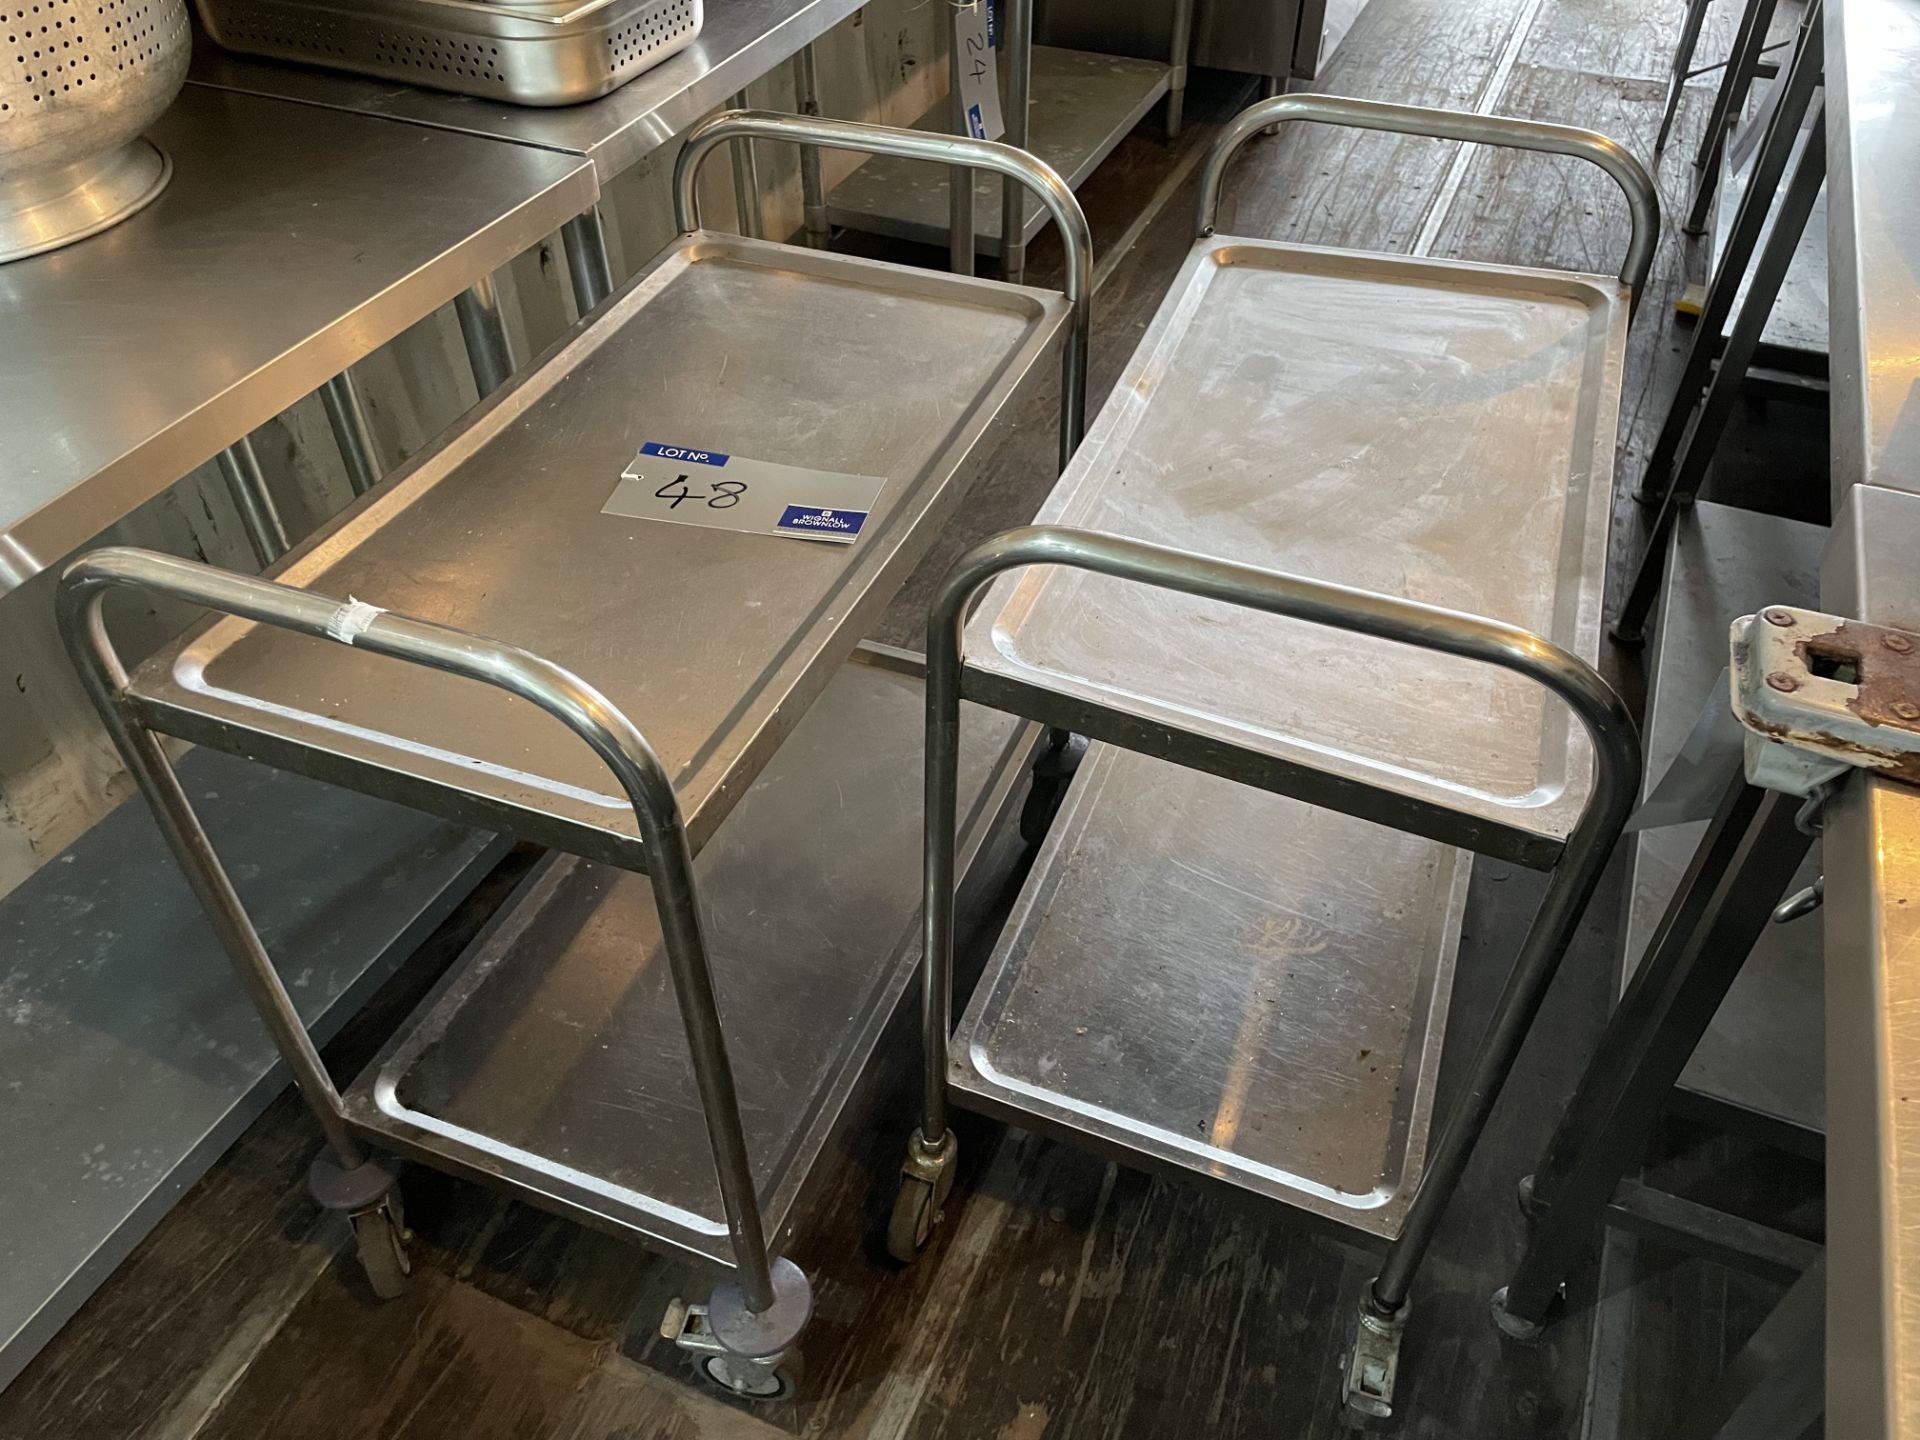 2 Stainless Steel 2 tier Catering Trollies, 80cm x 43cm x 70cm, damage to top shelf of one (